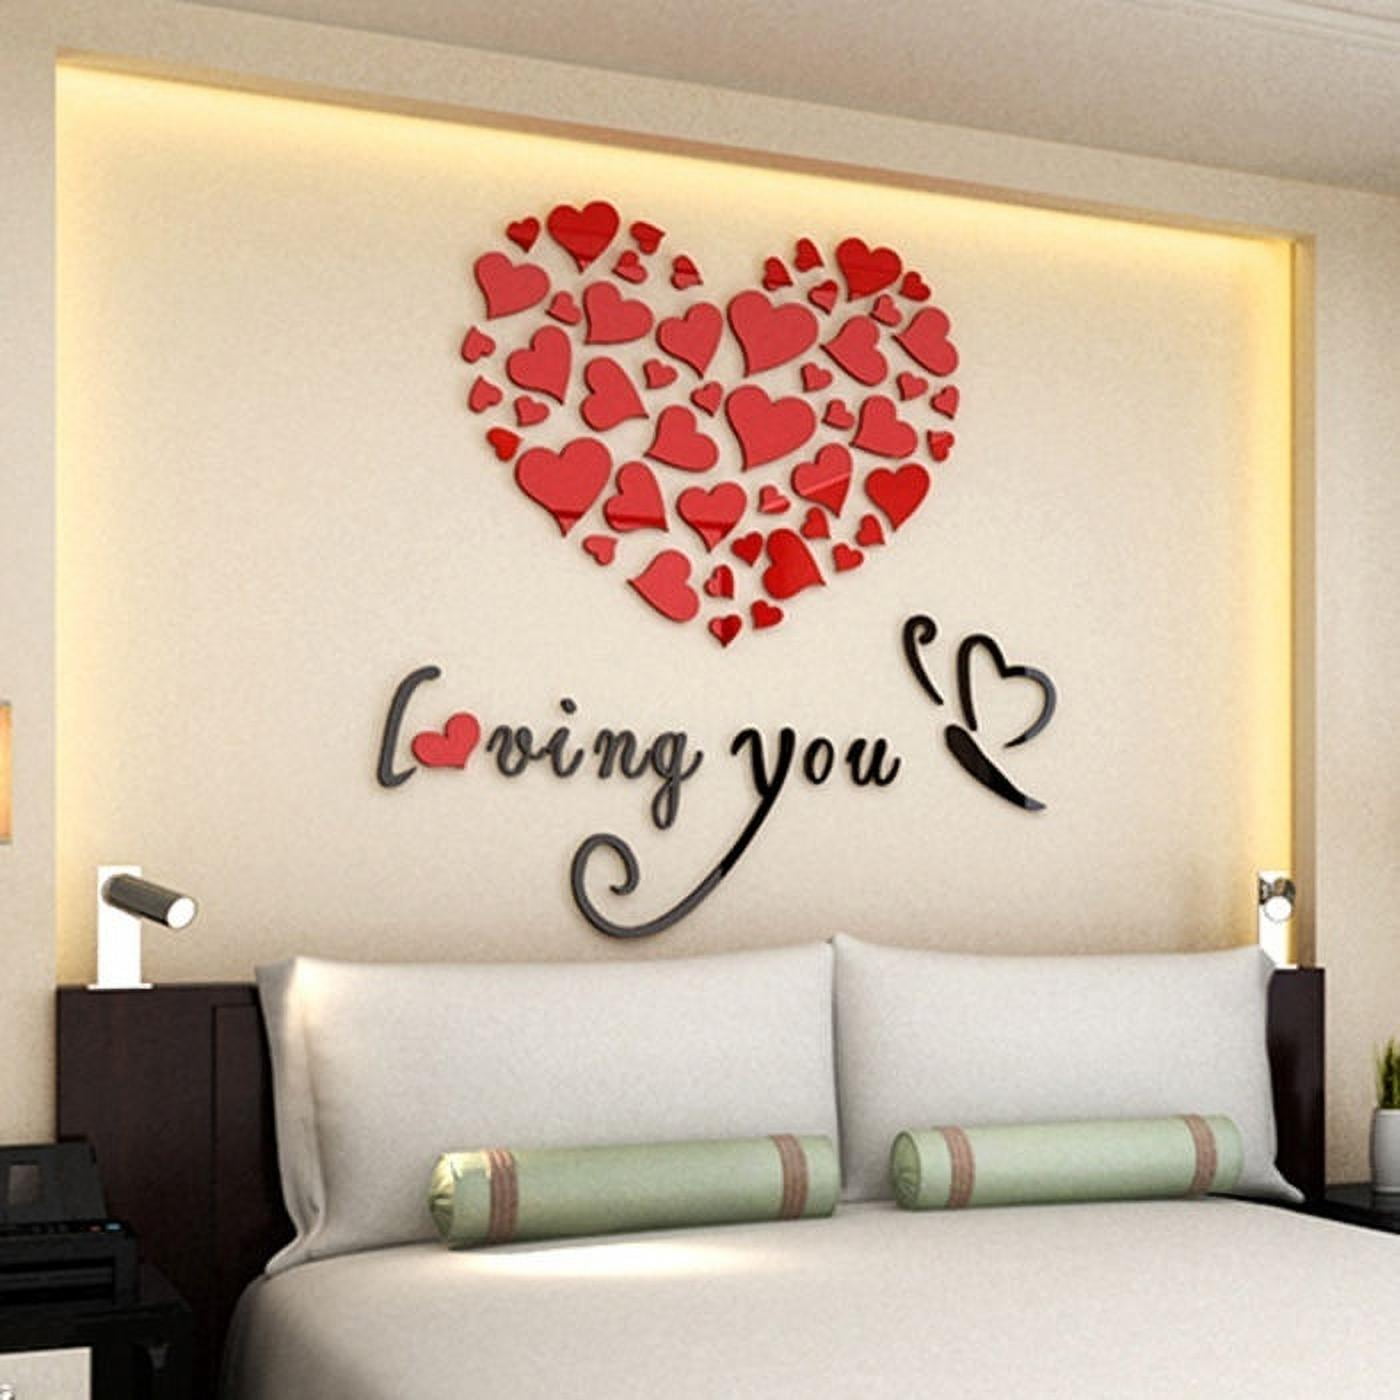 3D Mirror Love Hearts Wall Sticker Decal DIY Home Room Removable Art Mural Decor